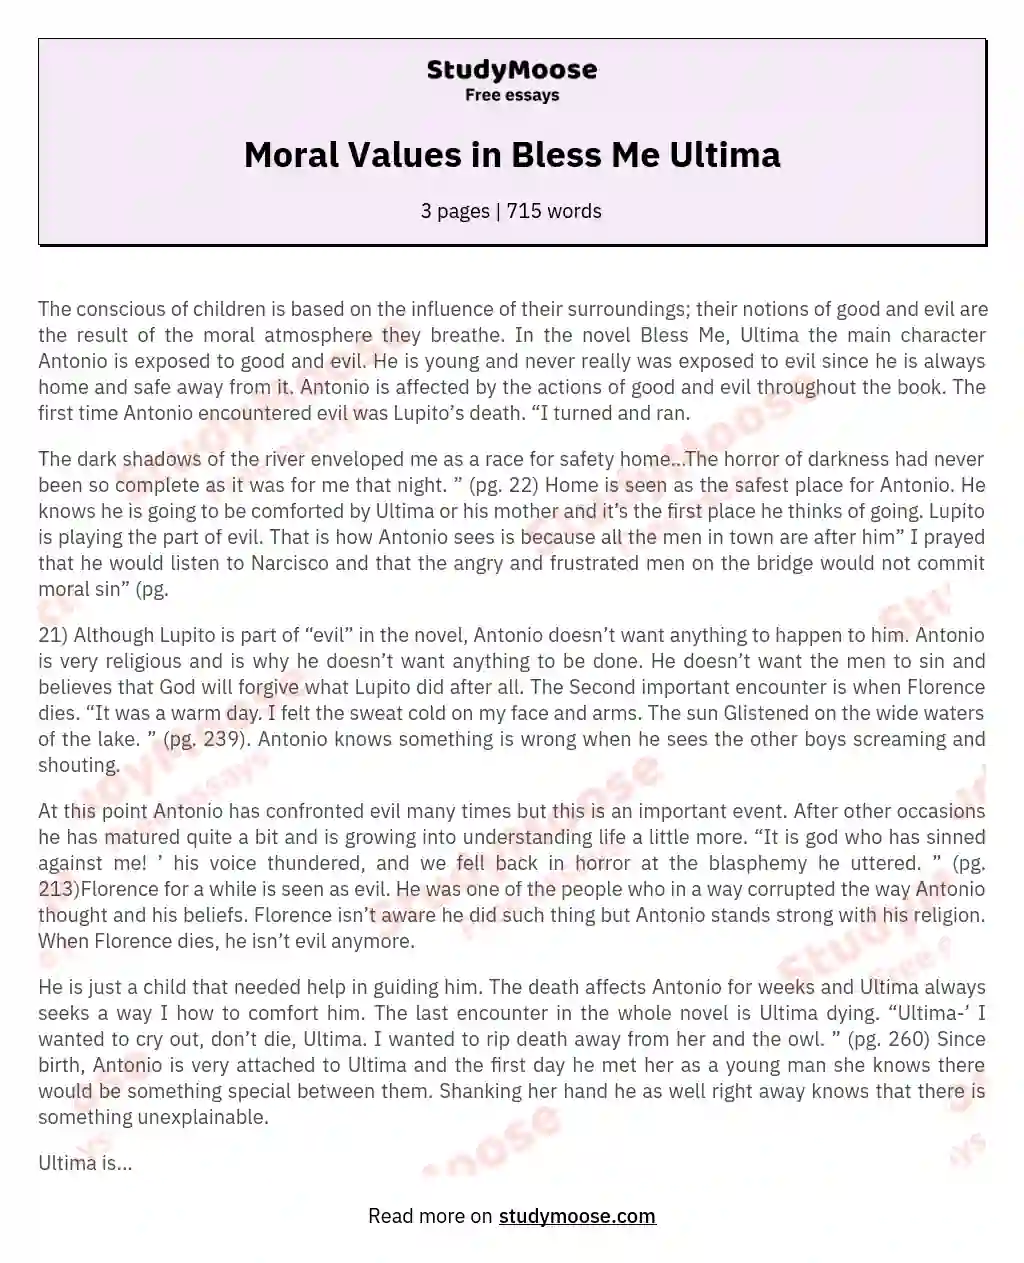 Moral Values in Bless Me Ultima essay